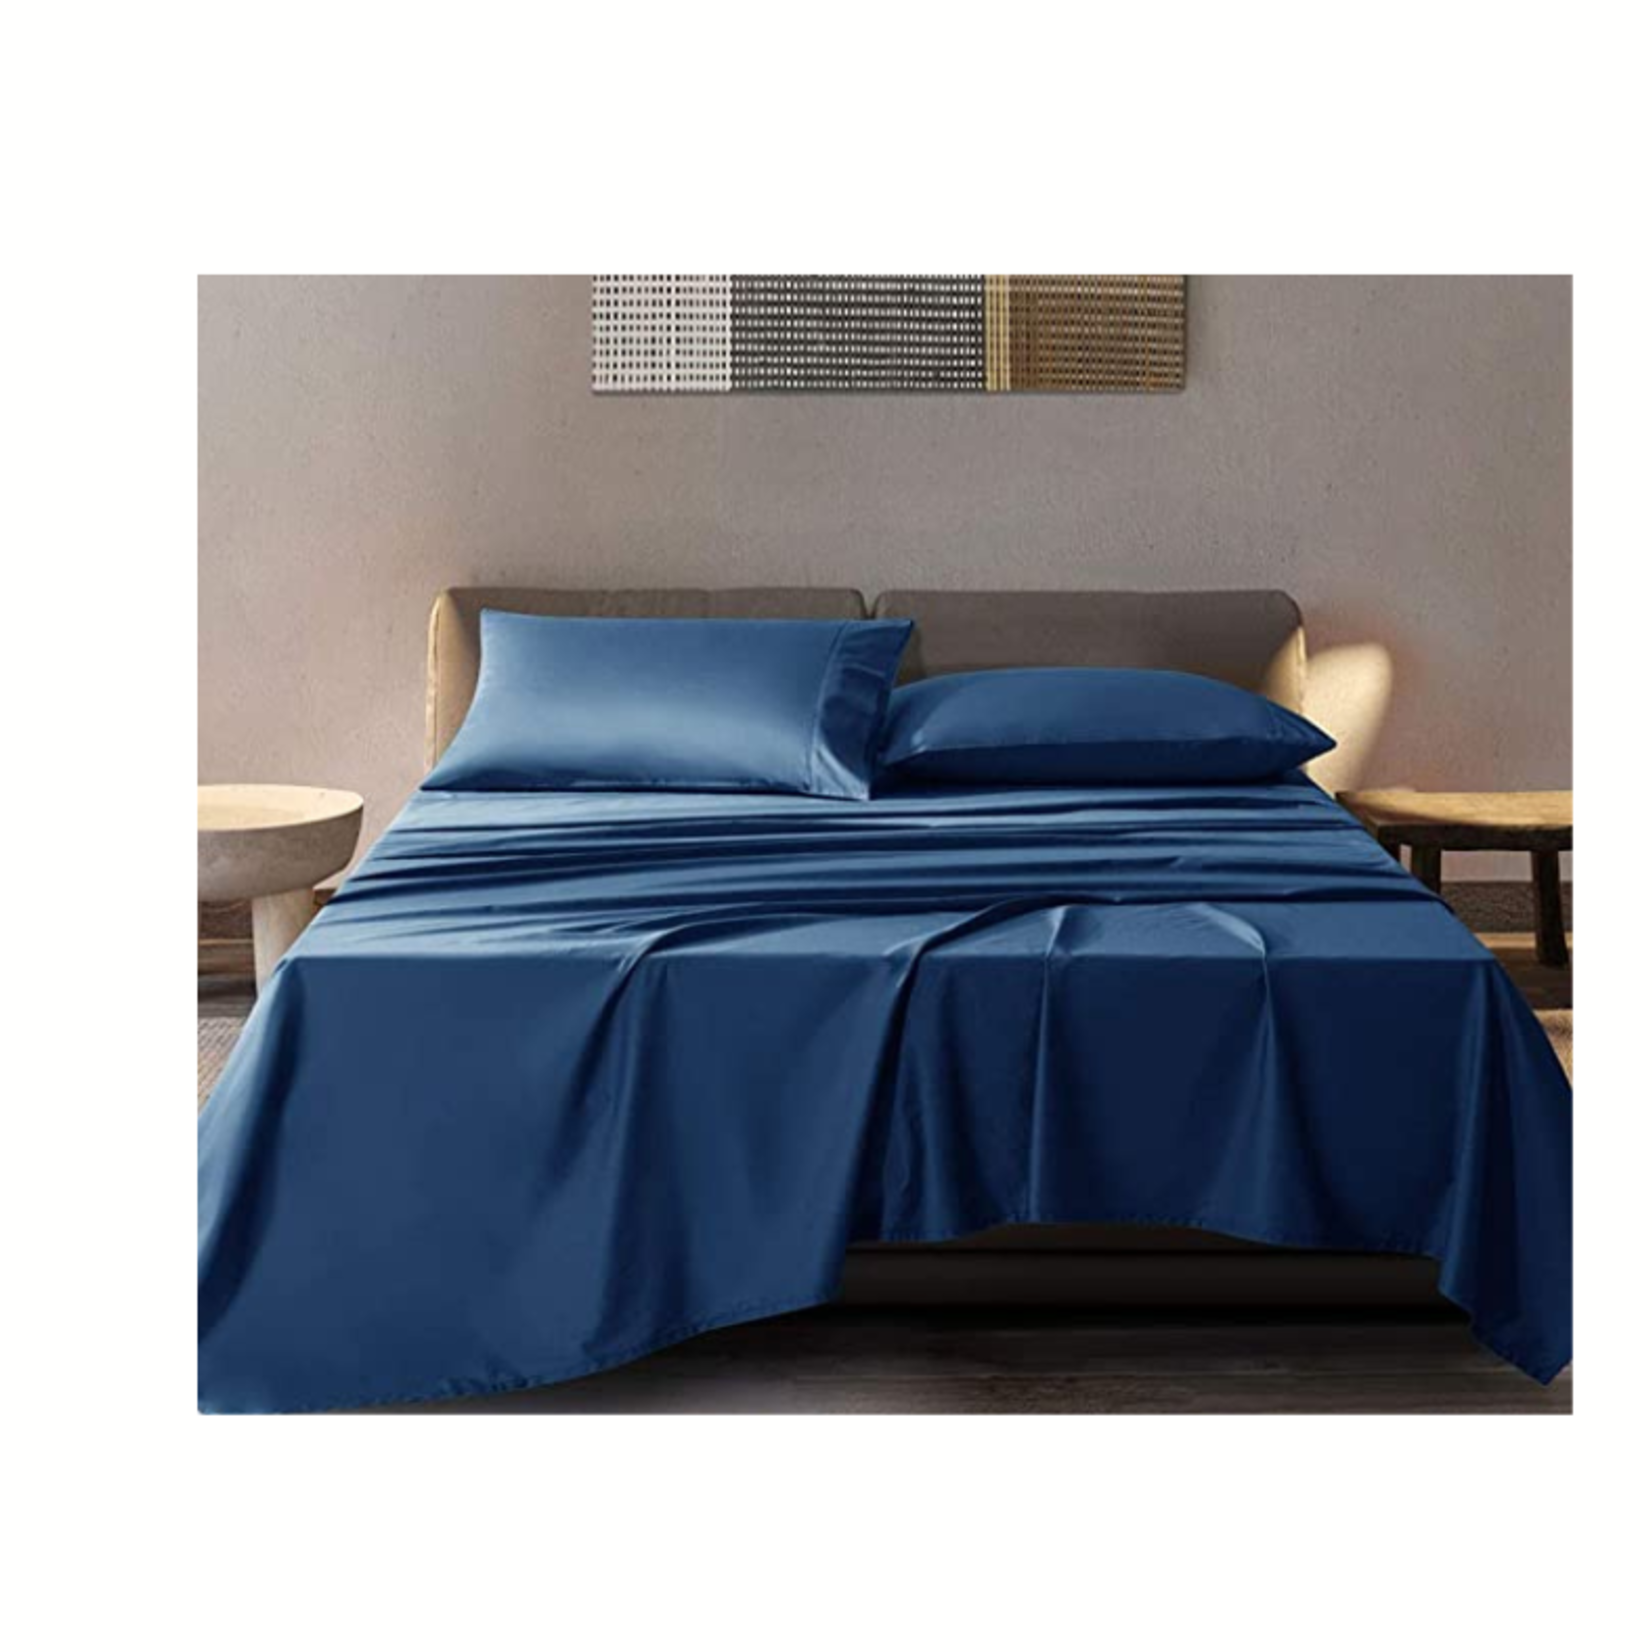 Sonoro Kate 600 Thread Count 4Pc Set - 100% Egyptian Cotton - Queen - Navy Blue